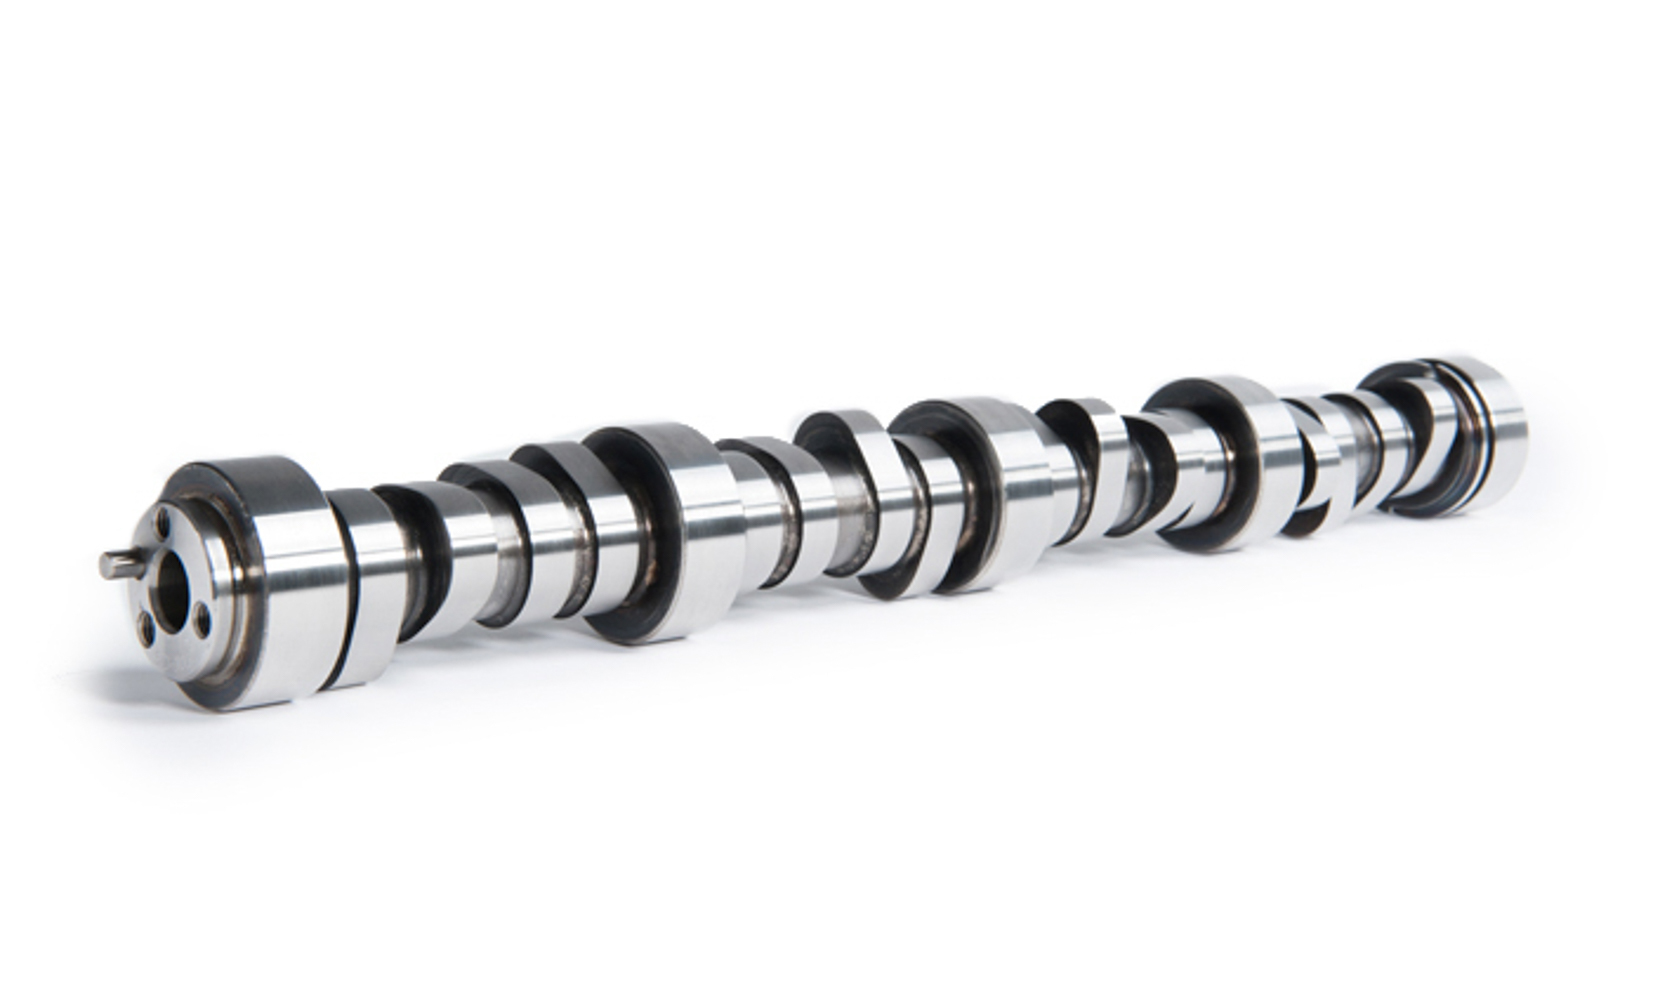 Cam Motion 03-01-0106 Camshaft, Stage 2, Hydraulic Roller, Lift 0.553 / 0.553 in, Duration 206 / 210, 115 LSA, 2500 / 5700 RPM, GM LS-Series, Each